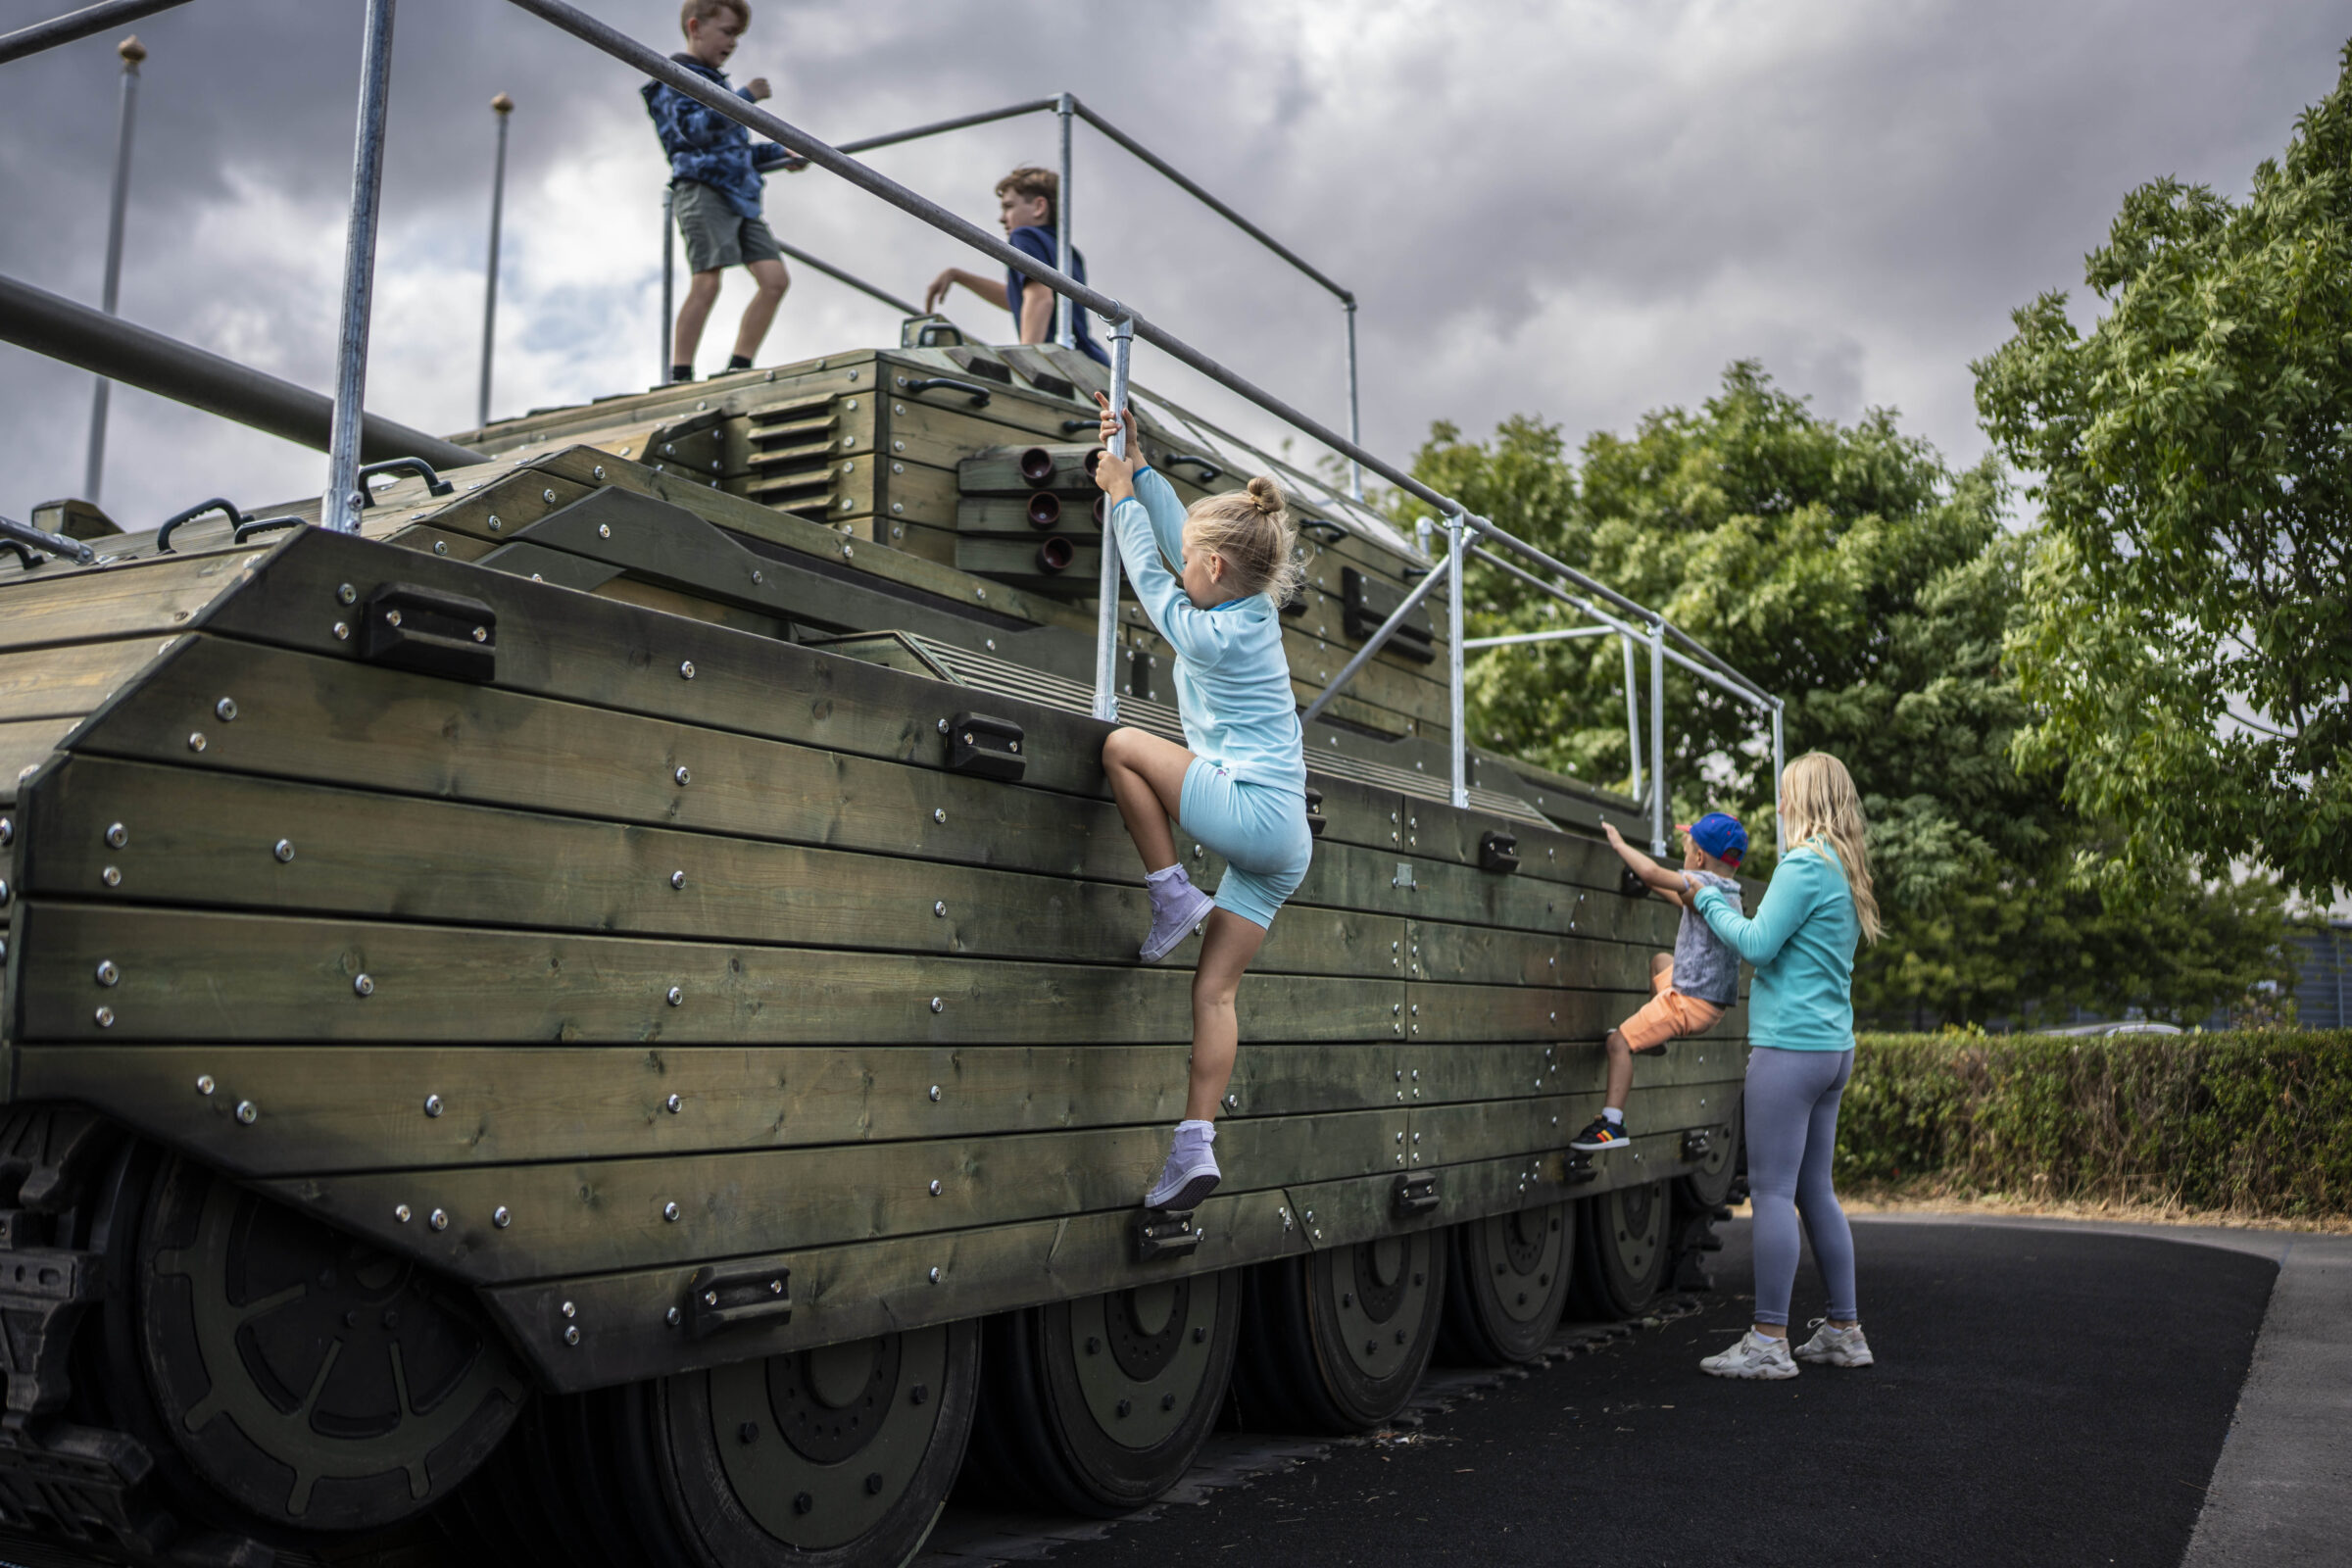 Play area at The Tank Museum